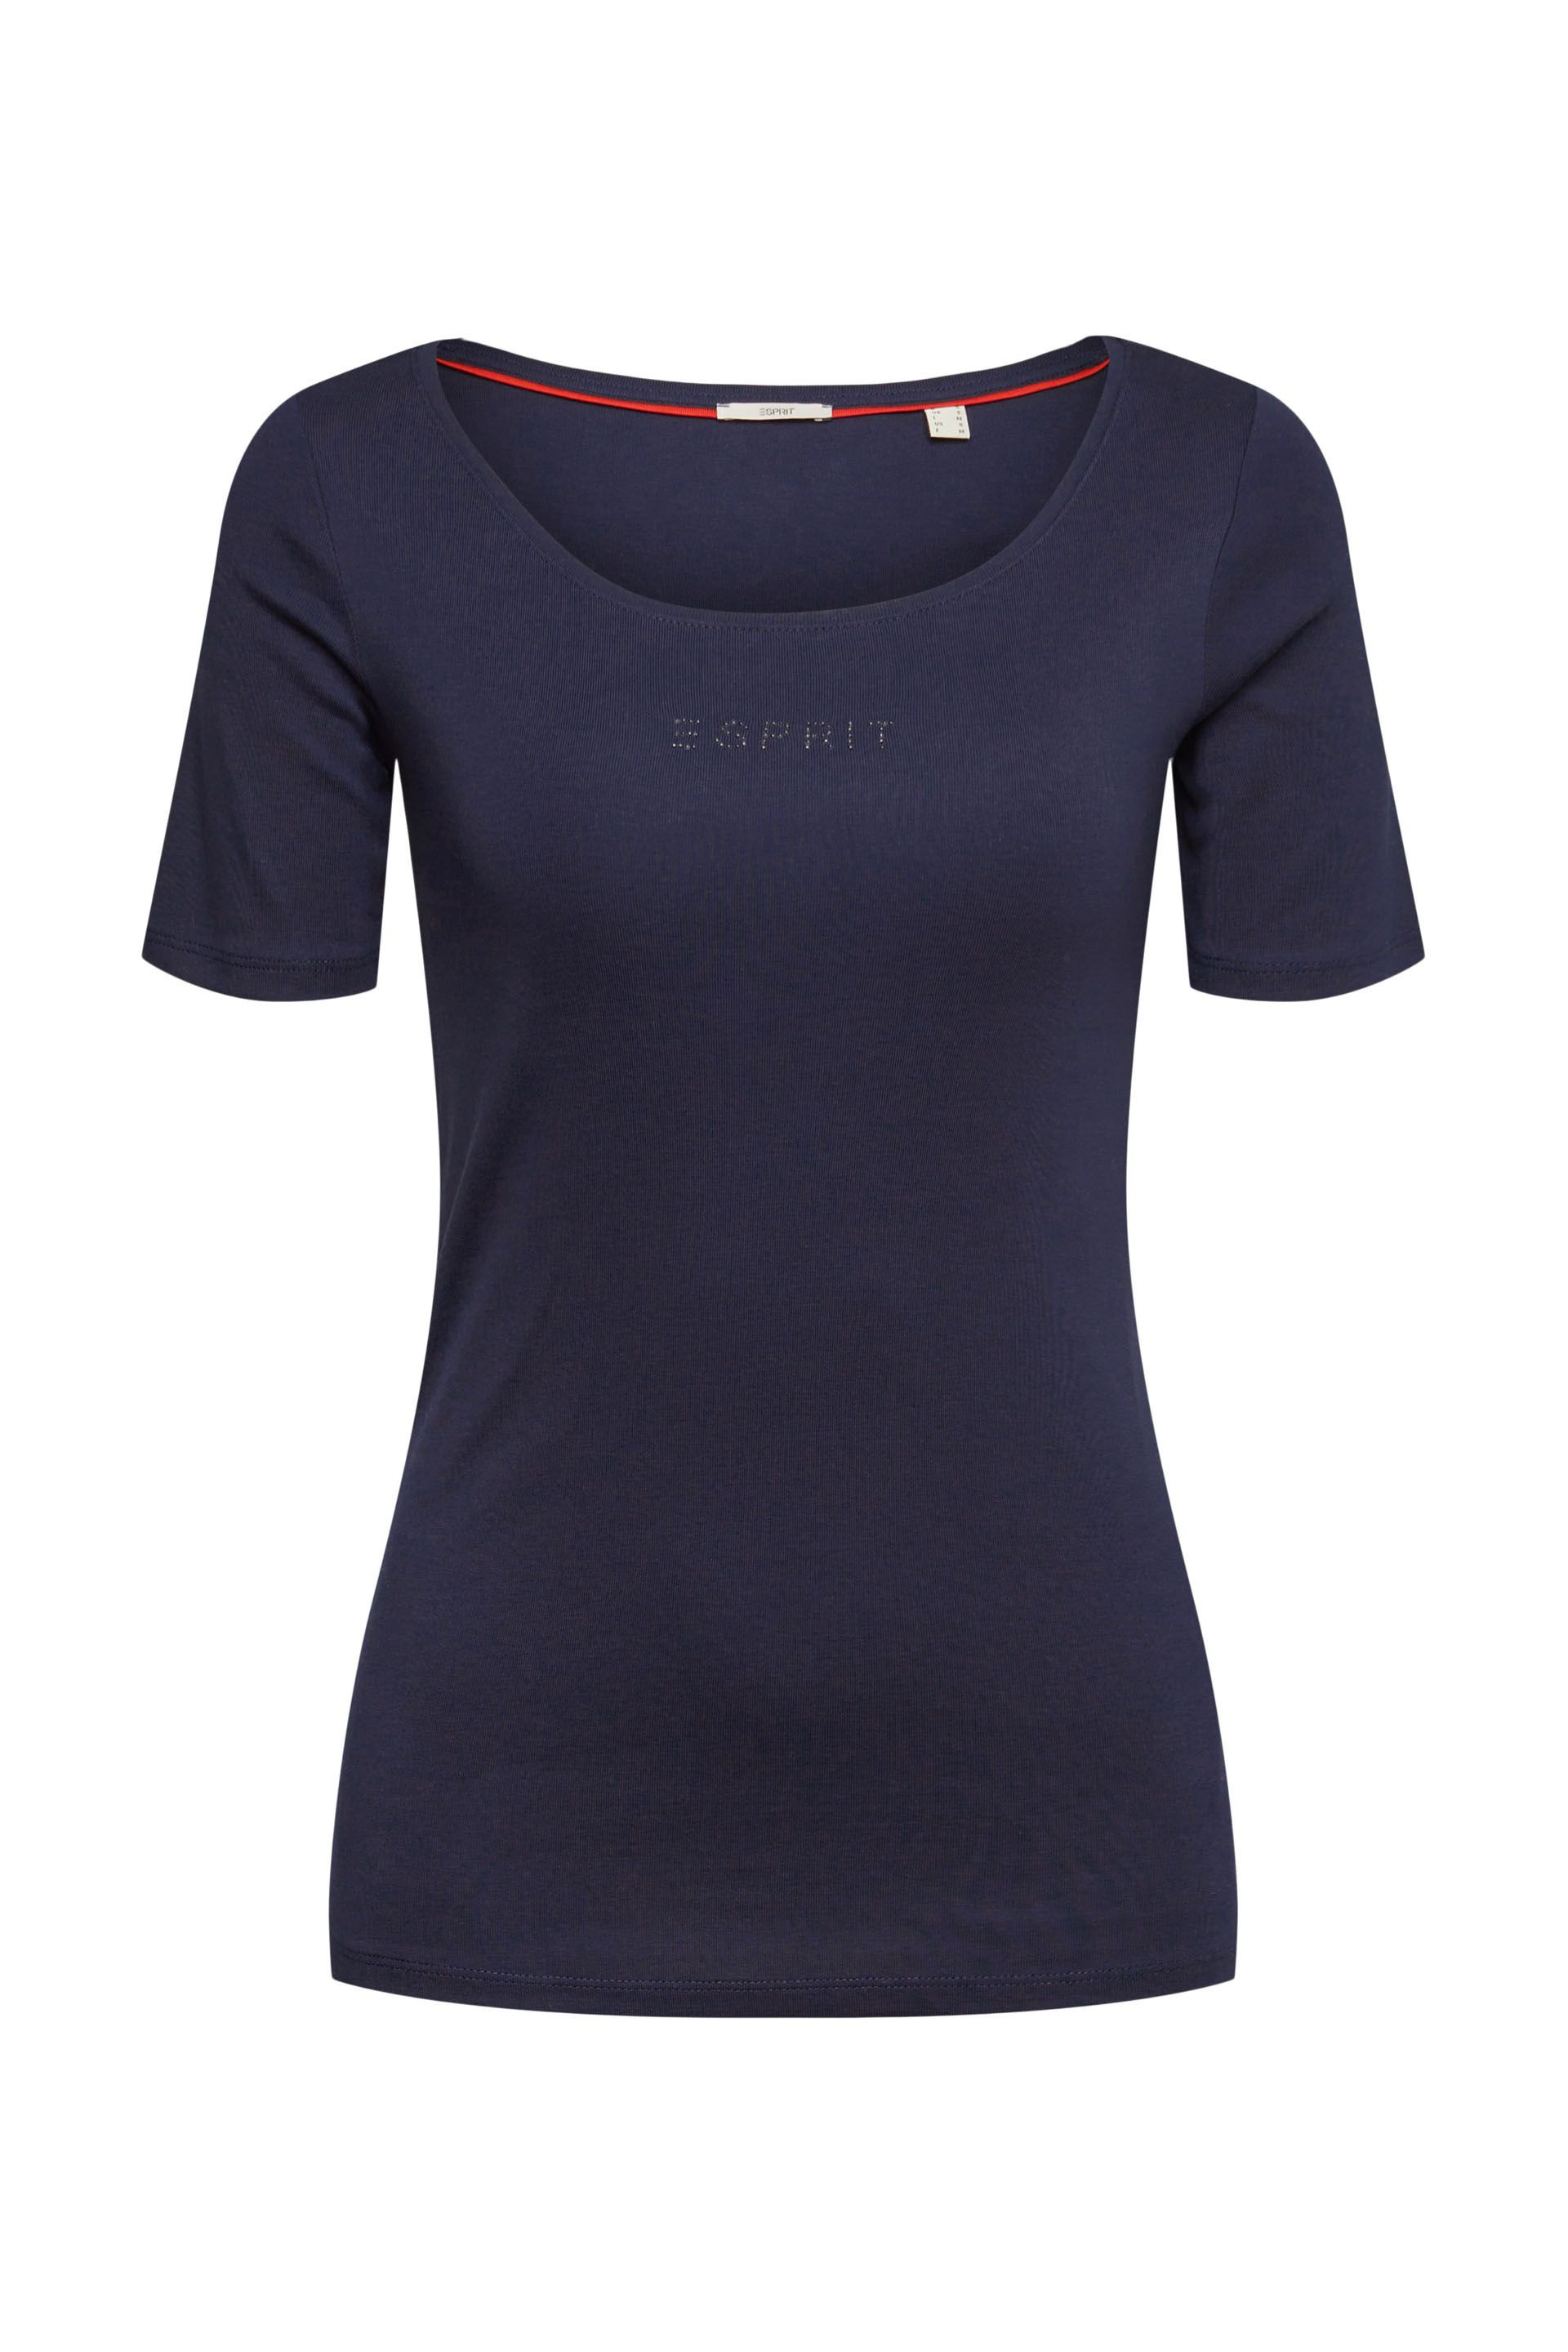 Esprit - T-shirt con logo in cotone, Blu scuro, large image number 0